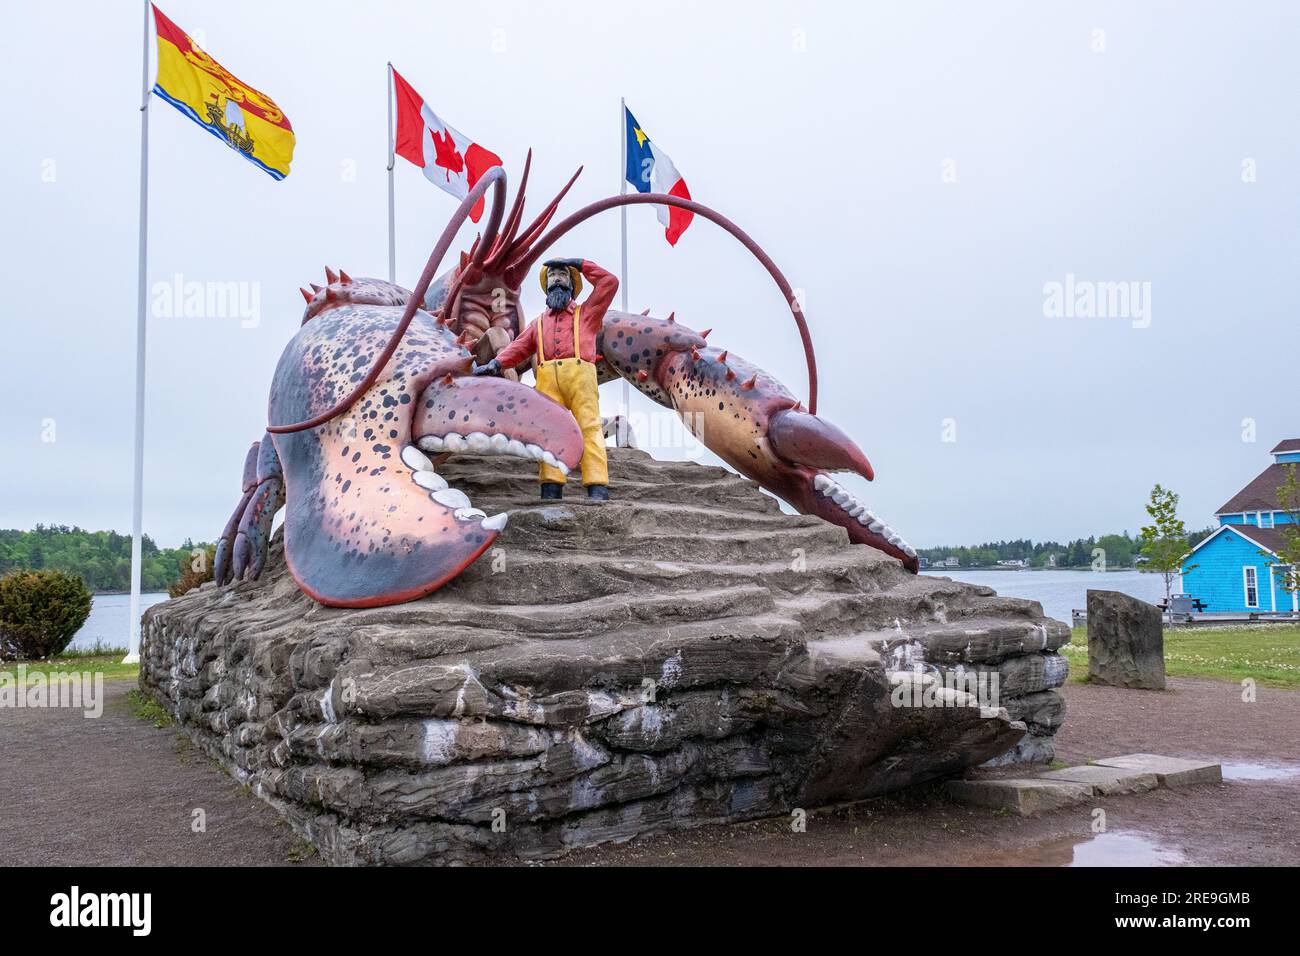 A statue of the Worlds Largest Lobster is a tourist attraction commissioned by the Town of Shediac New Brunswick to promote its lobster fishery. Stock Photo